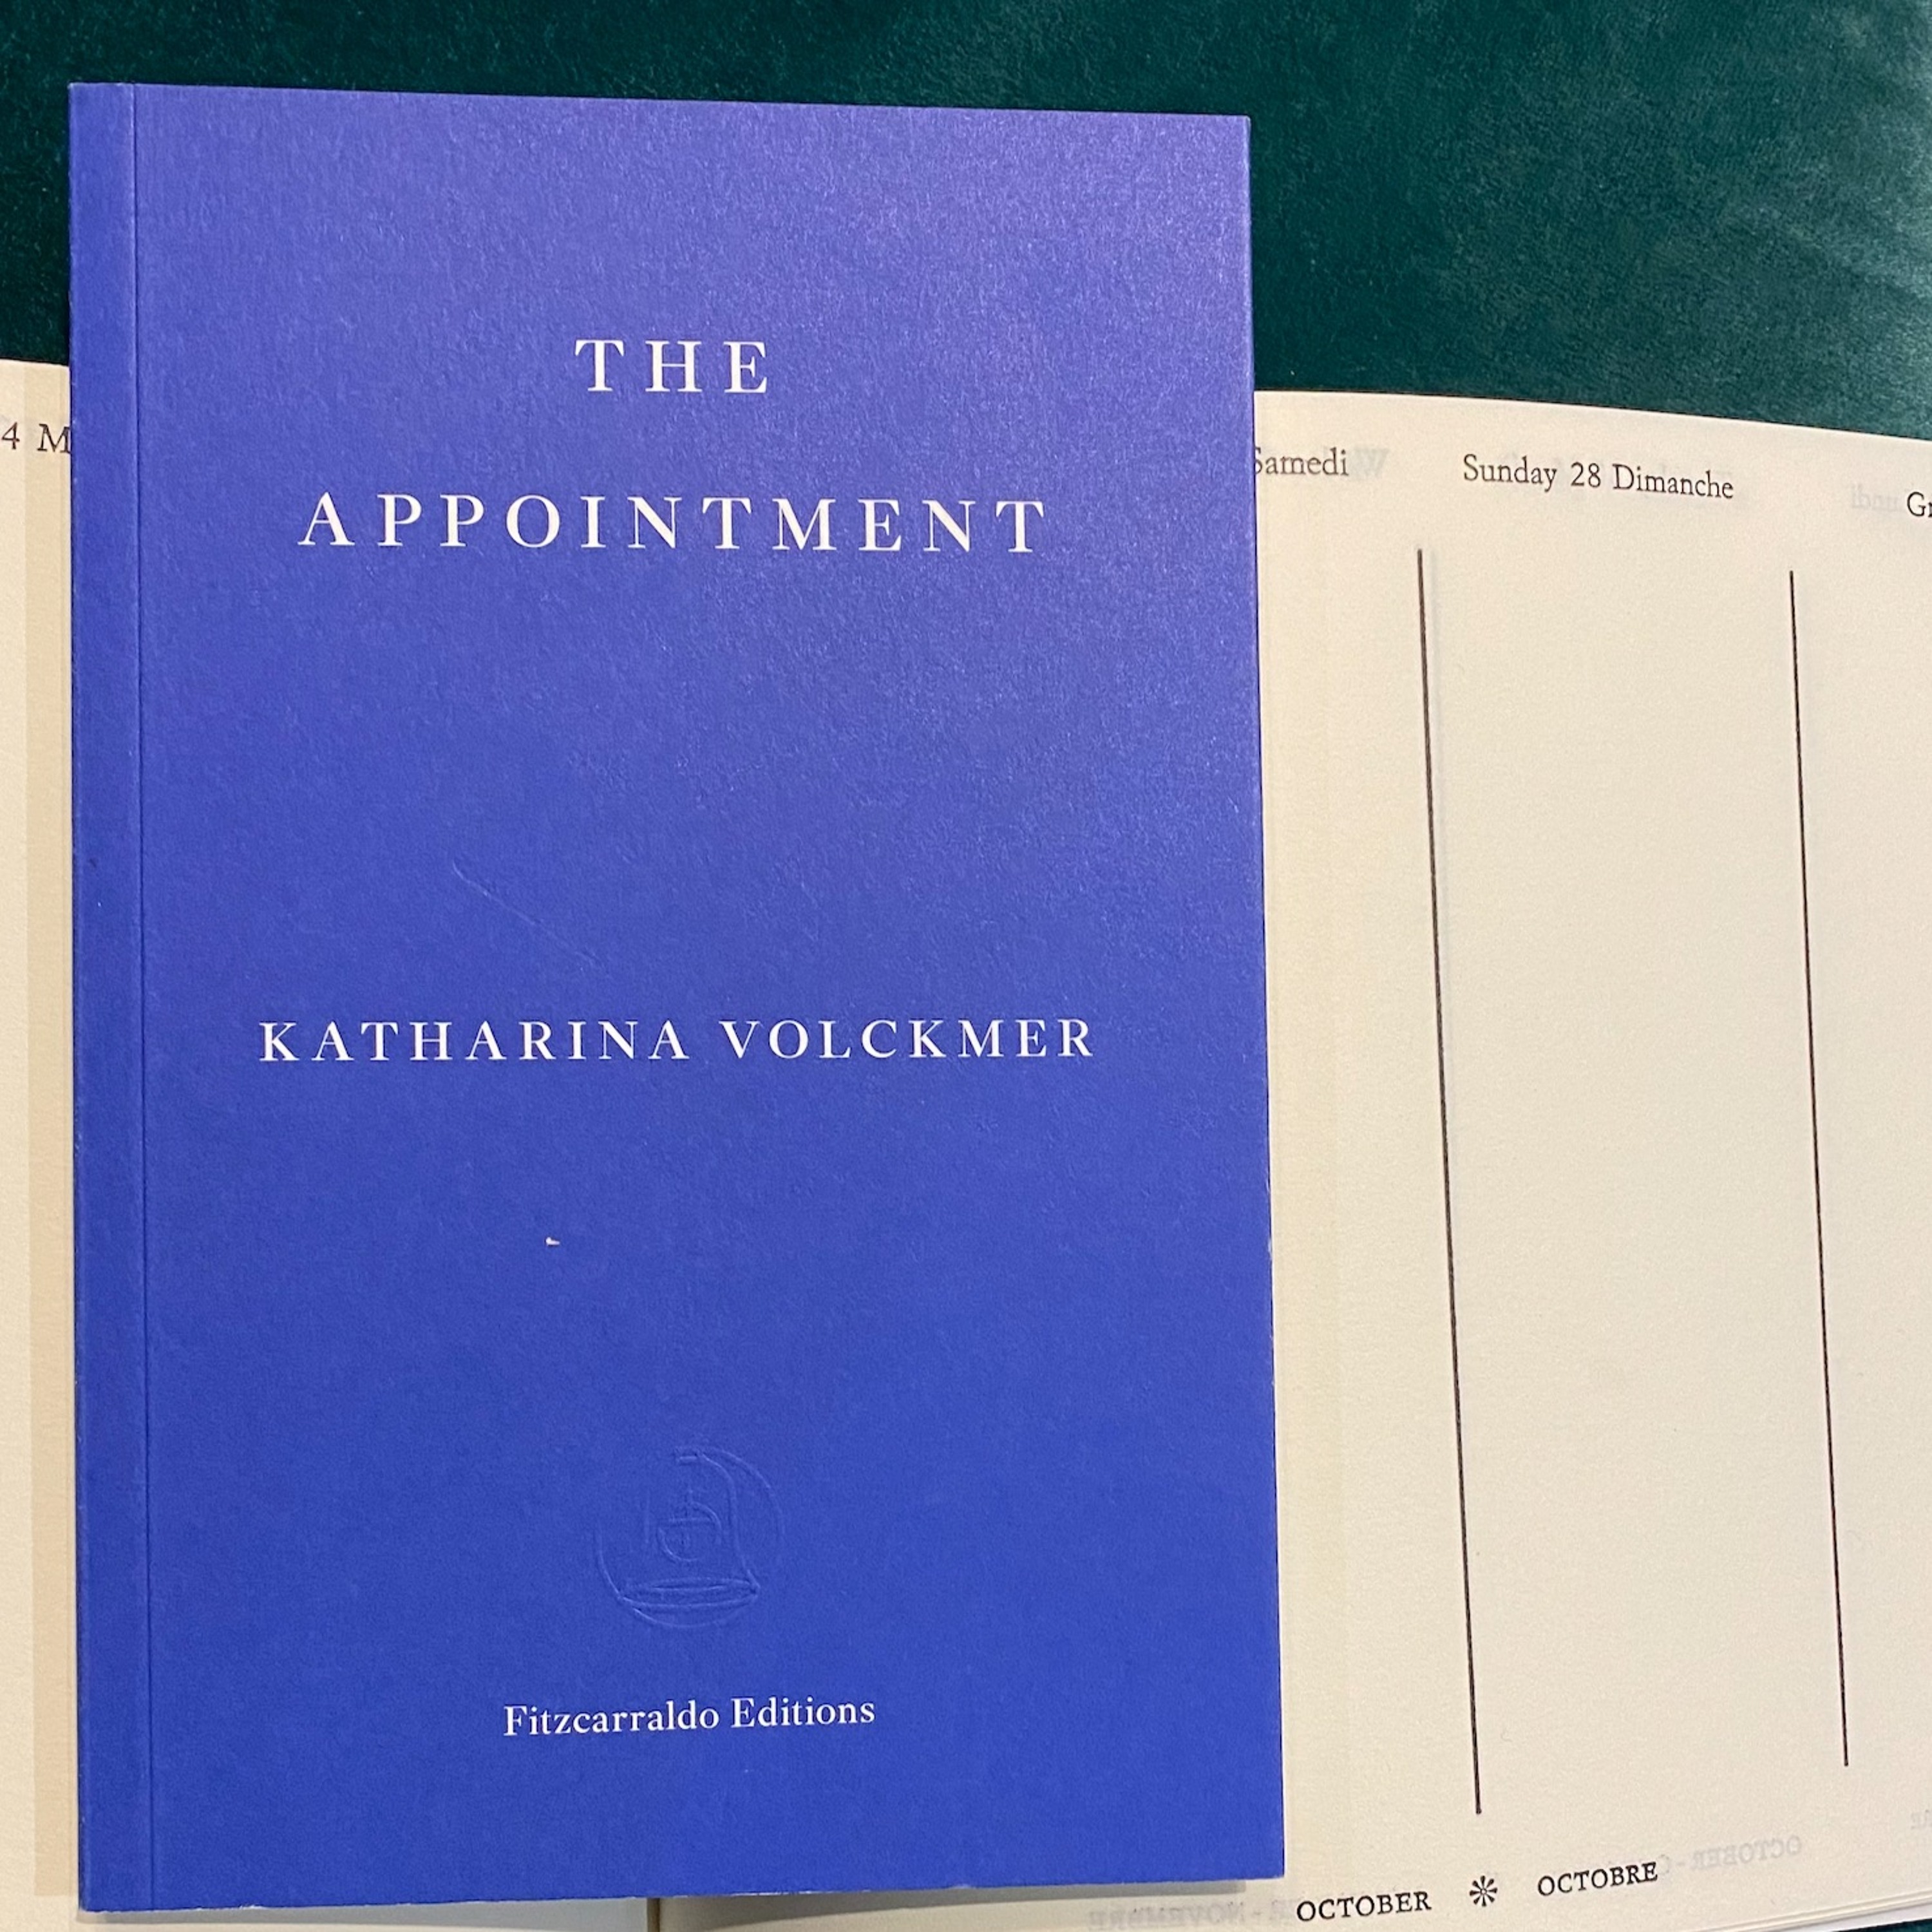 Katharina Volckmer on The Appointment